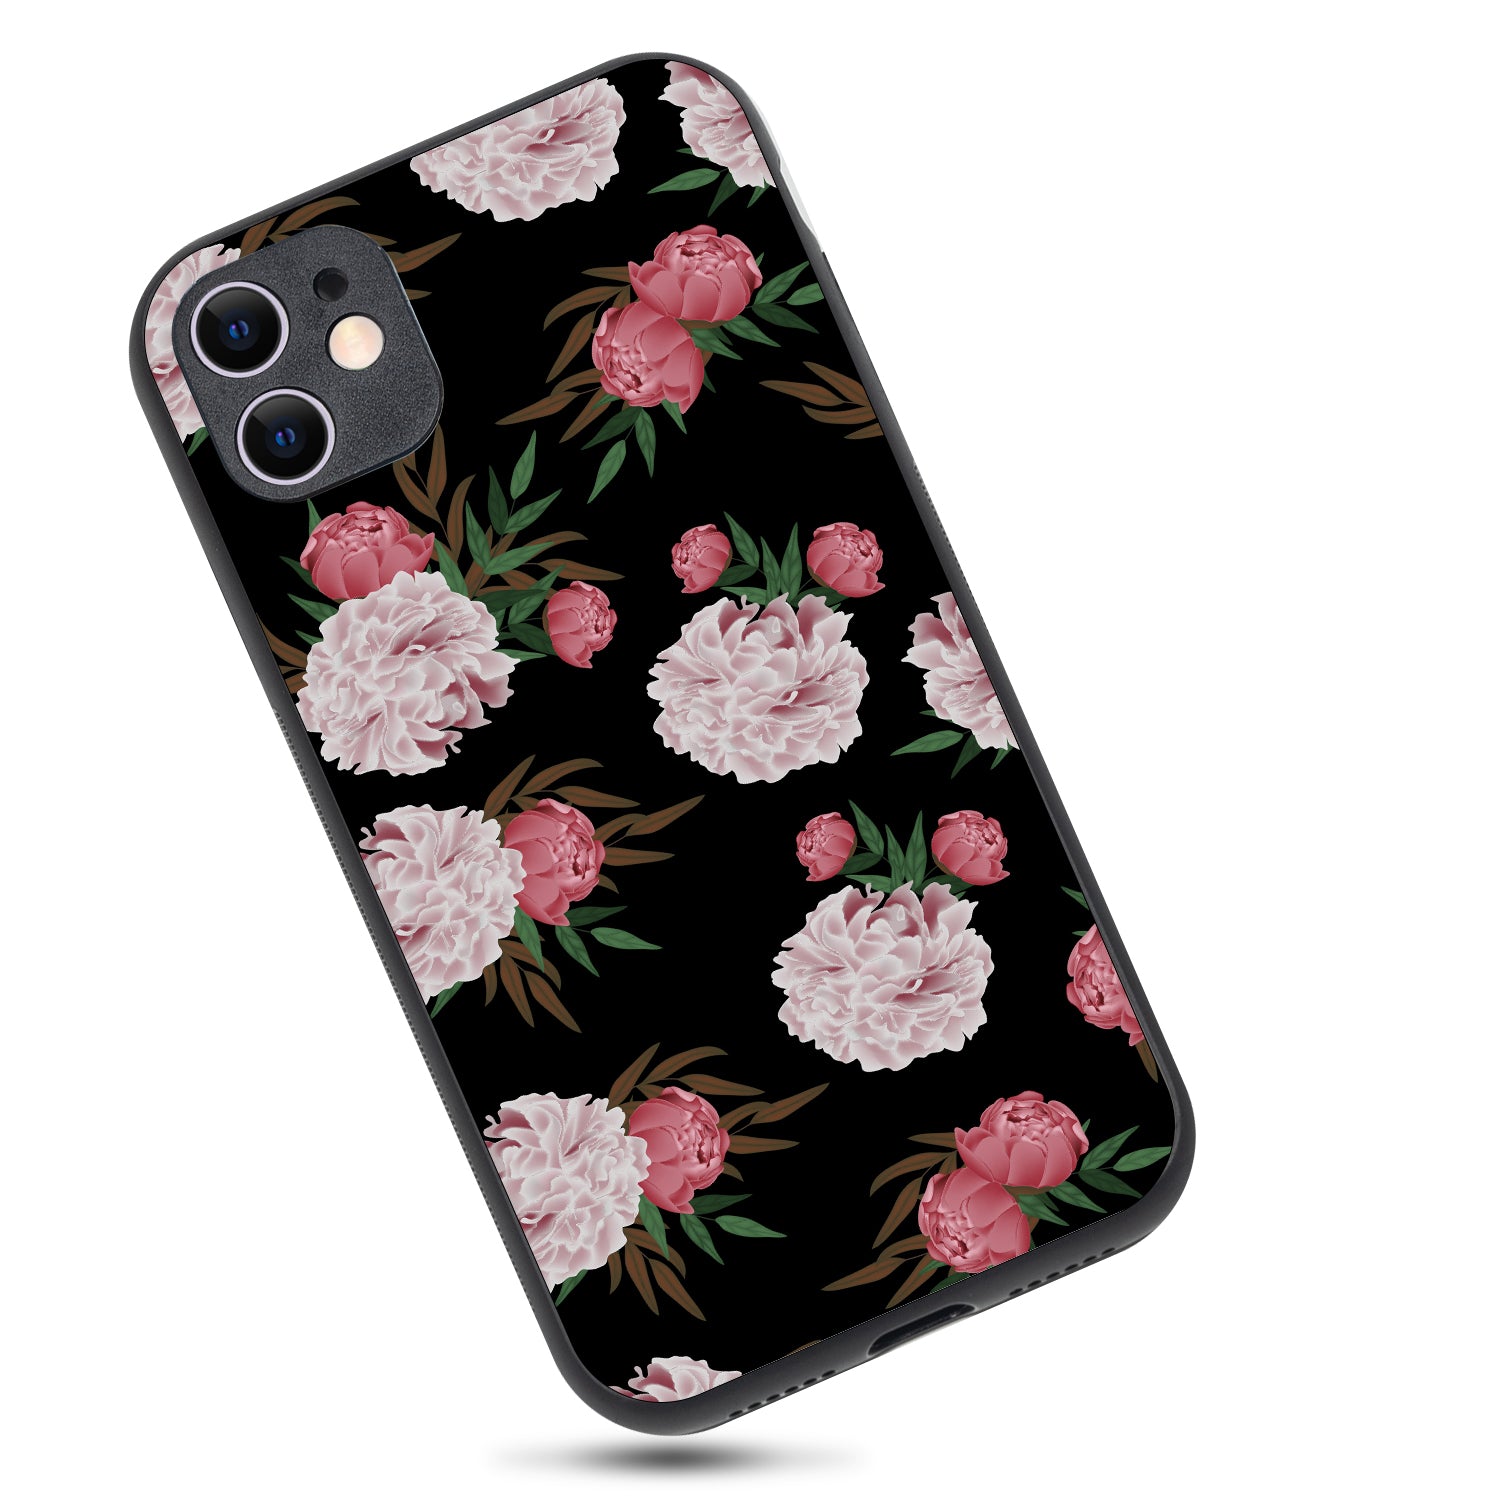 Pink Floral iPhone 11 Case